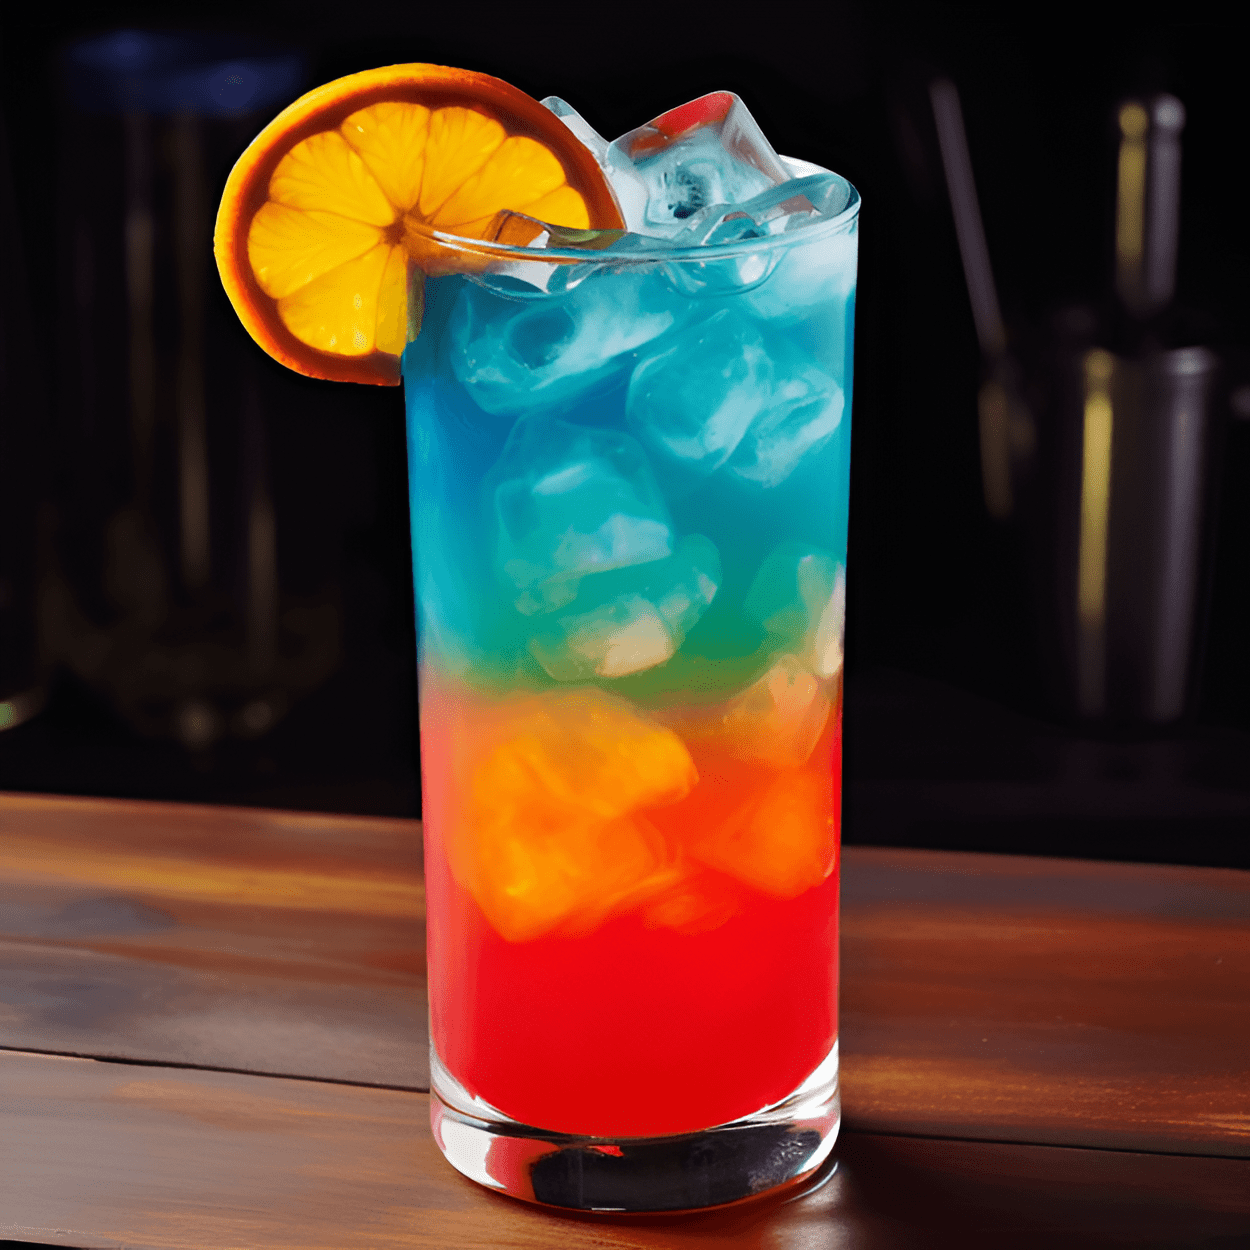 Tie Dye Cocktail Recipe - The Tie Dye cocktail is a delightful mix of sweet and sour, with a fruity undertone that makes it incredibly refreshing. The combination of different fruit juices gives it a complex, layered flavor that's both exotic and familiar.